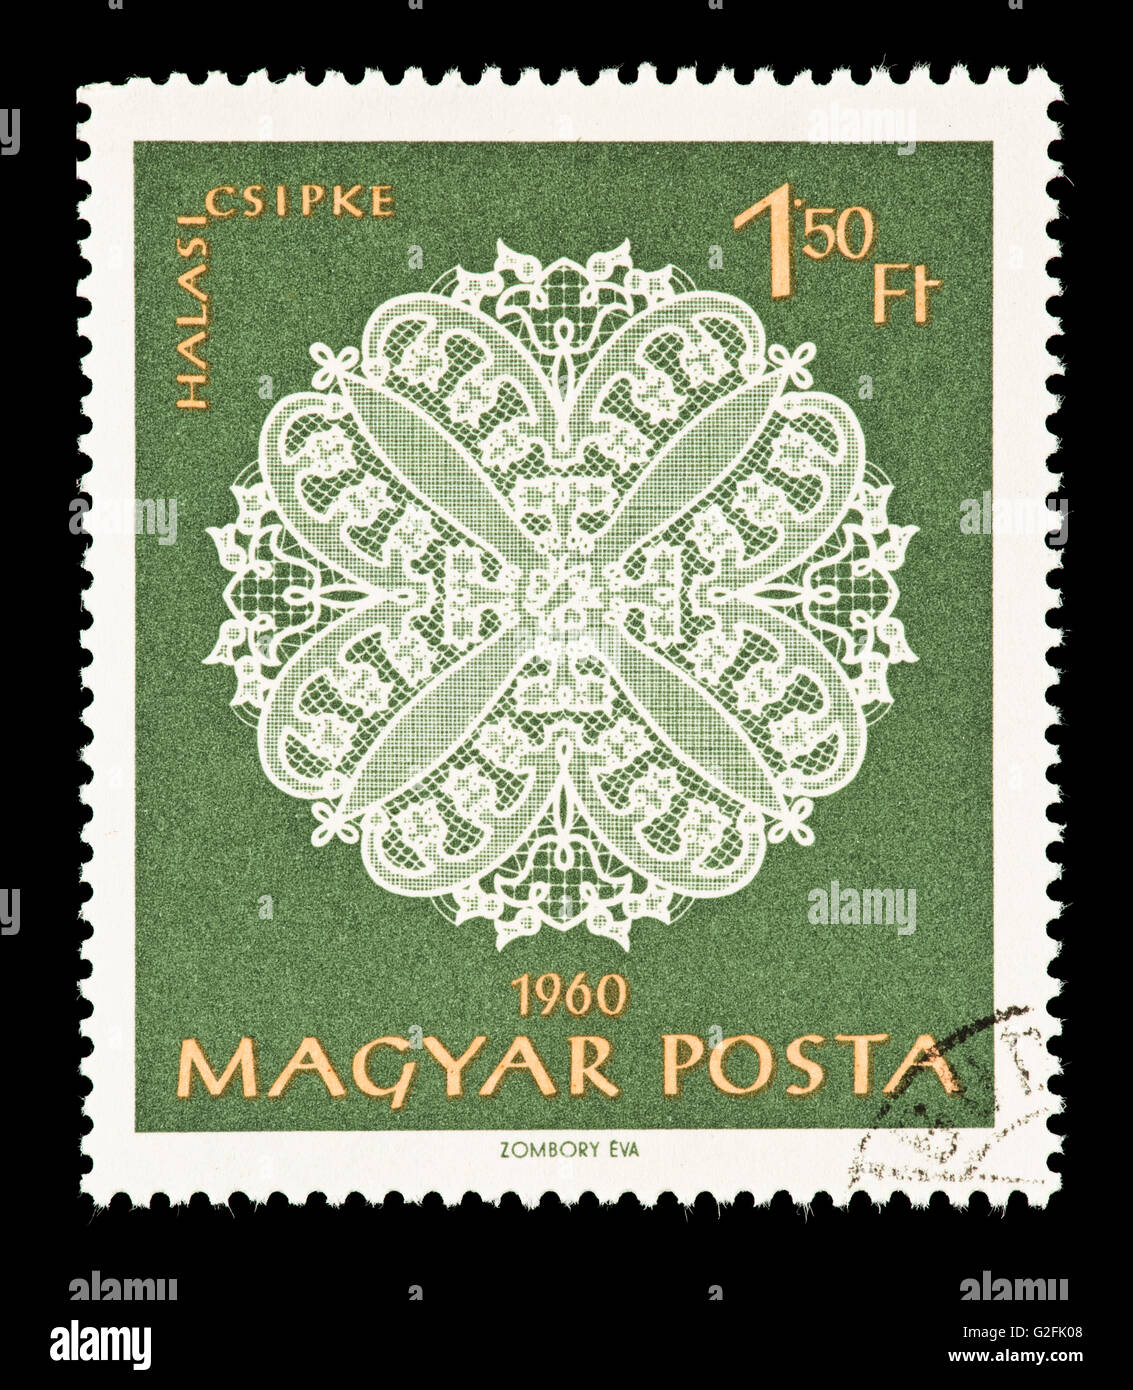 Postage stamp from Hungary depicting Halas needle lace Stock Photo